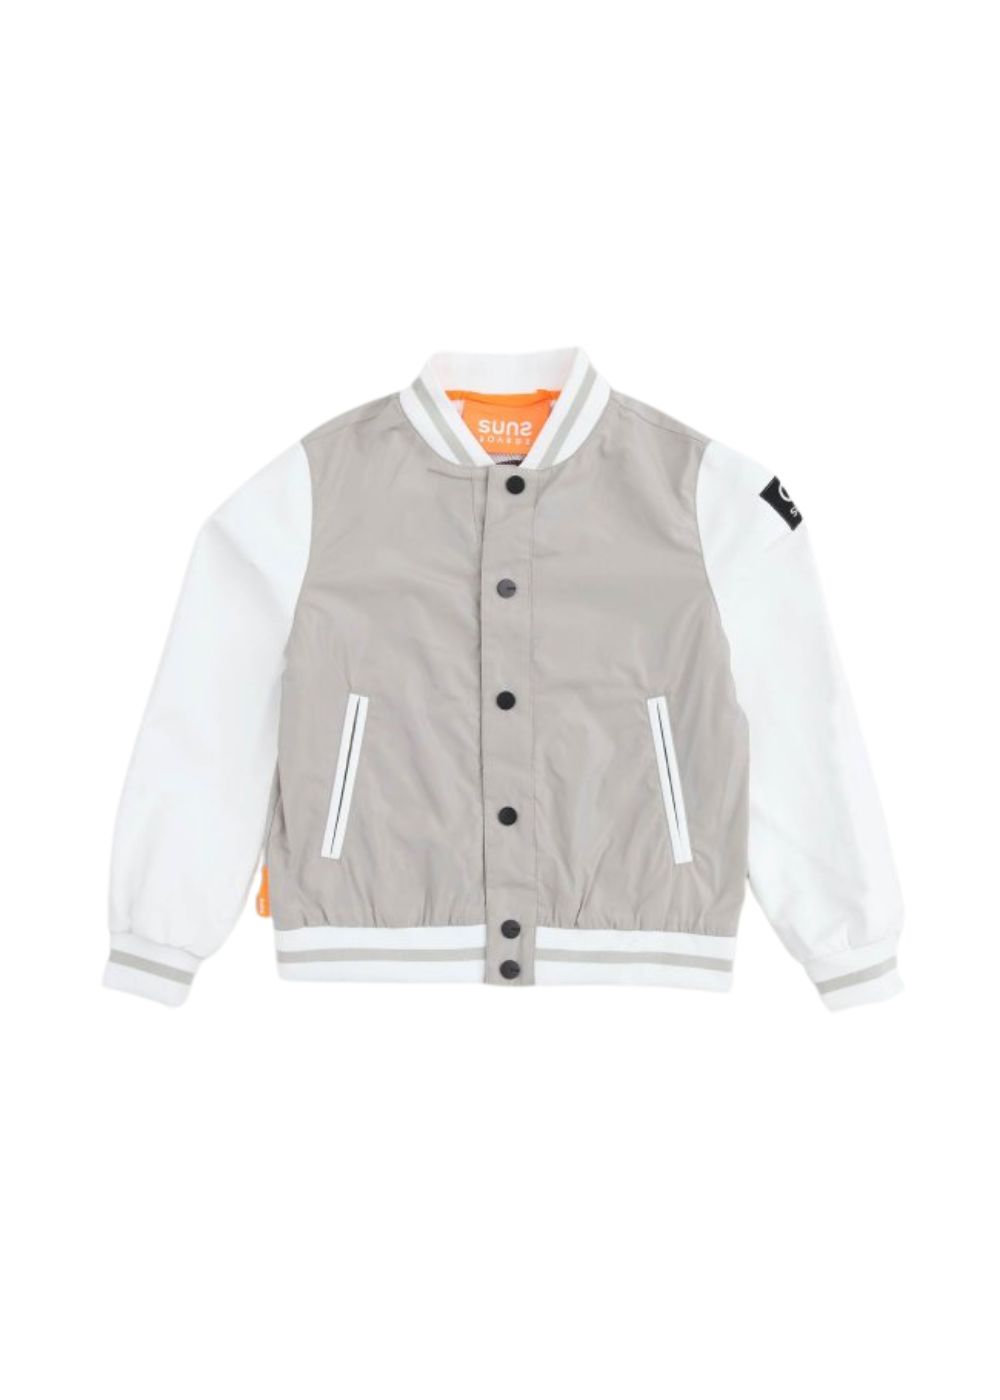 Featured image for “Suns Bomber Bianco e Beige”